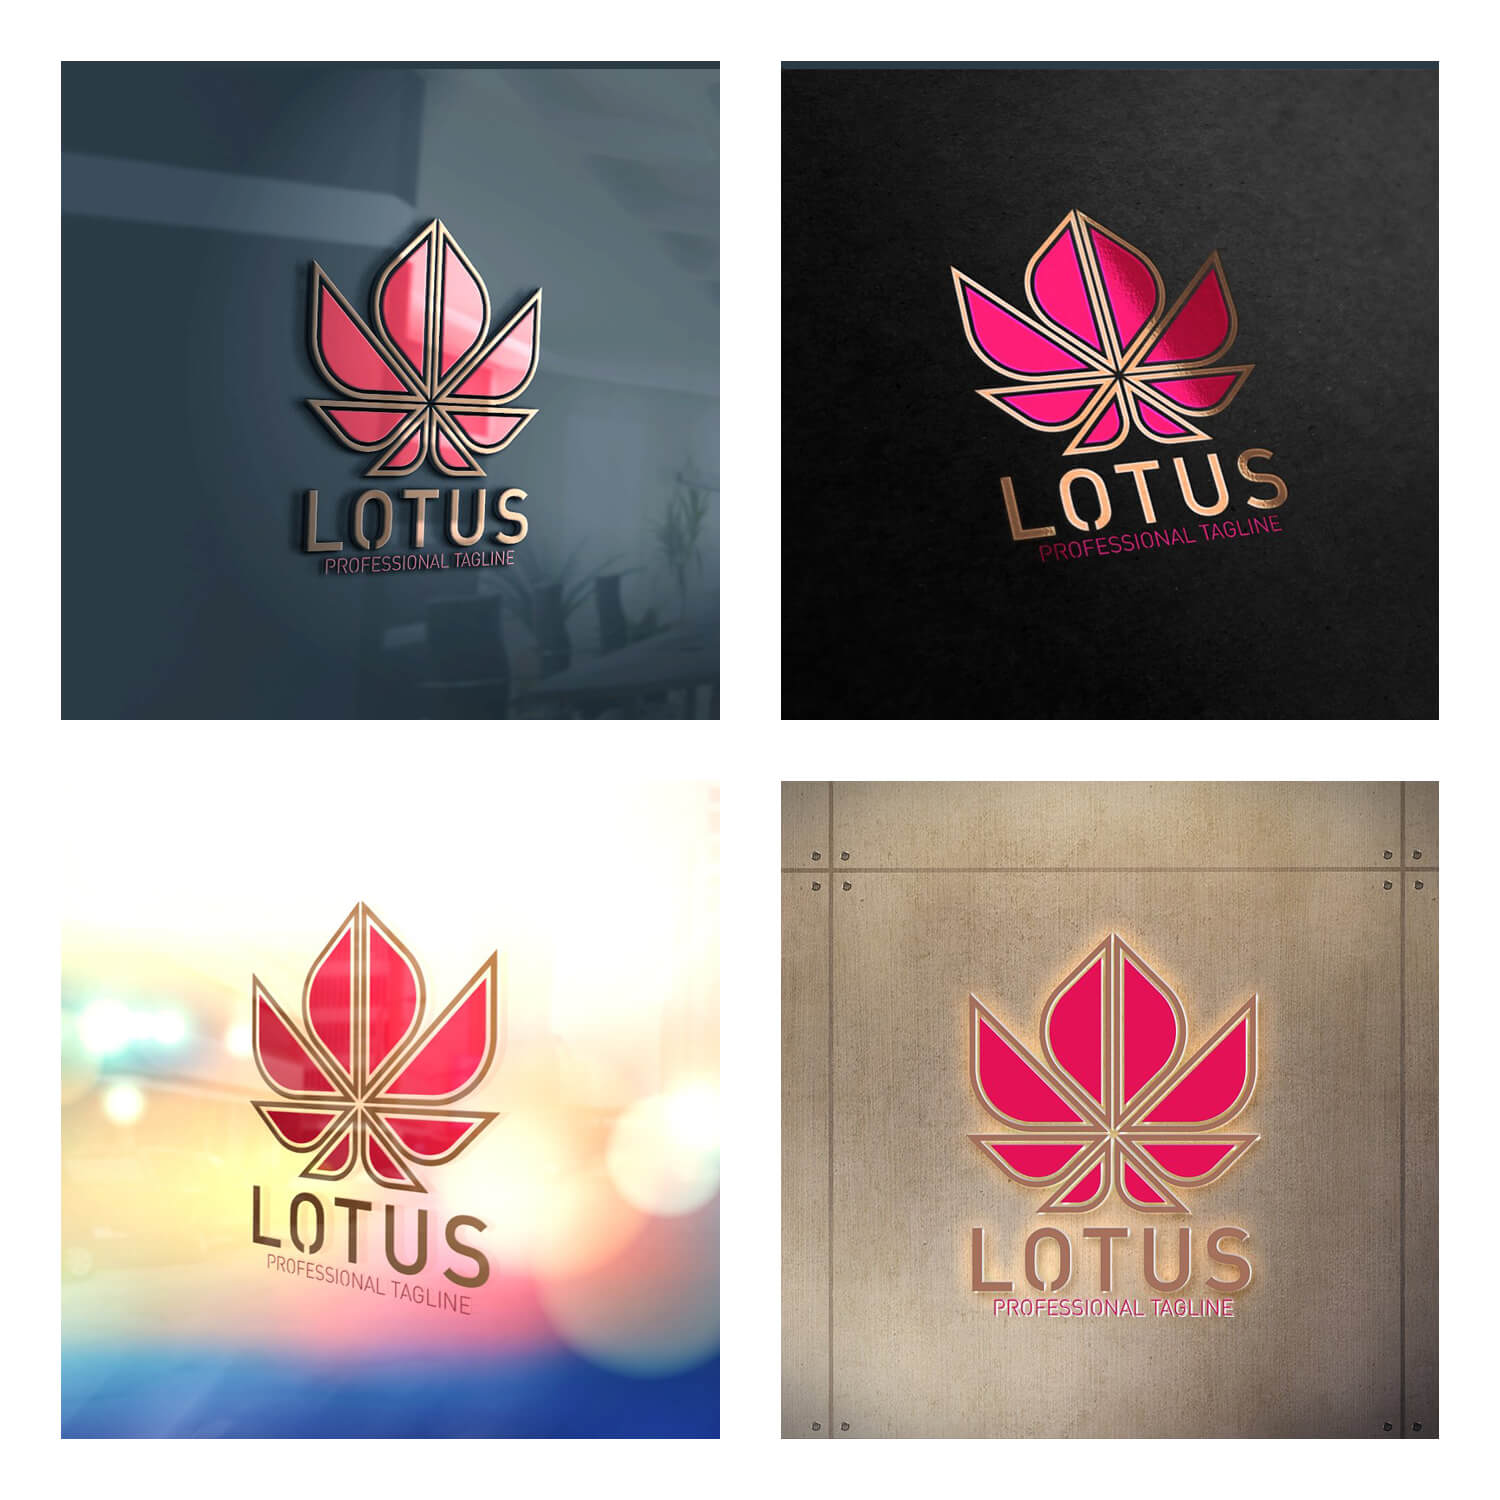 Professional image of the scarlet lotus logo on different surfaces.